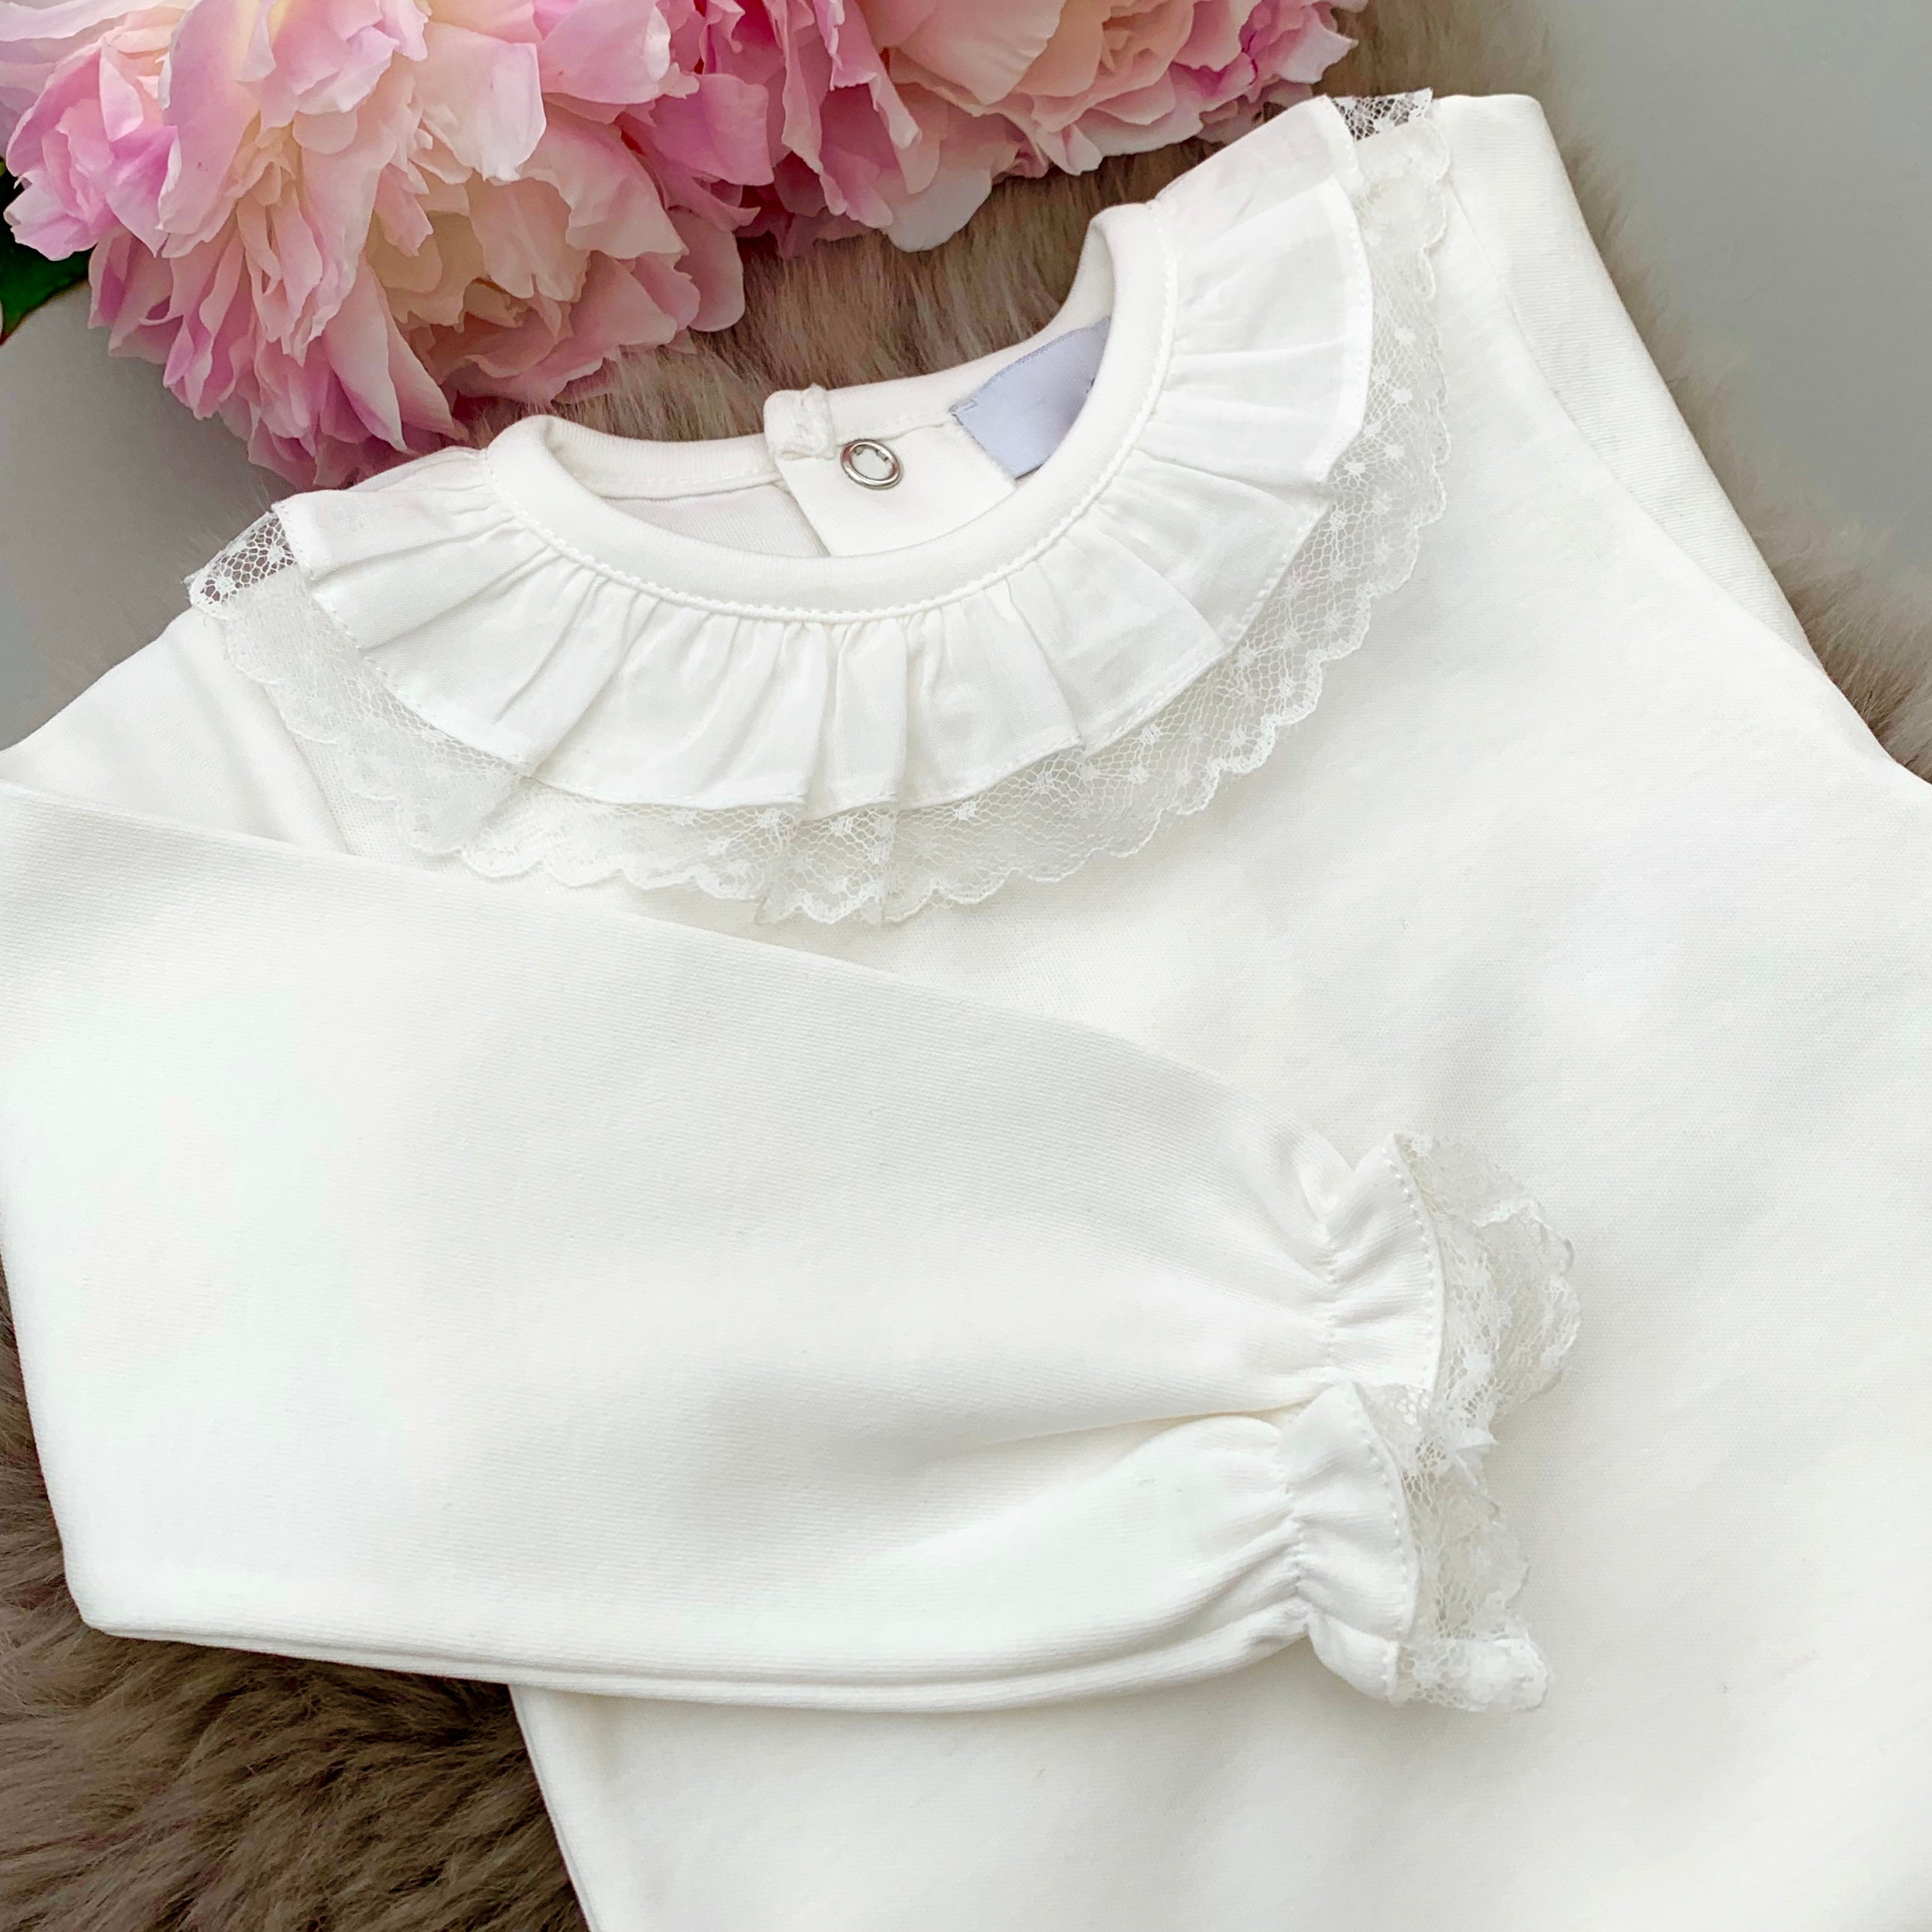 Portuguese lace edge frill collar bodysuit in ivory with long sleeves